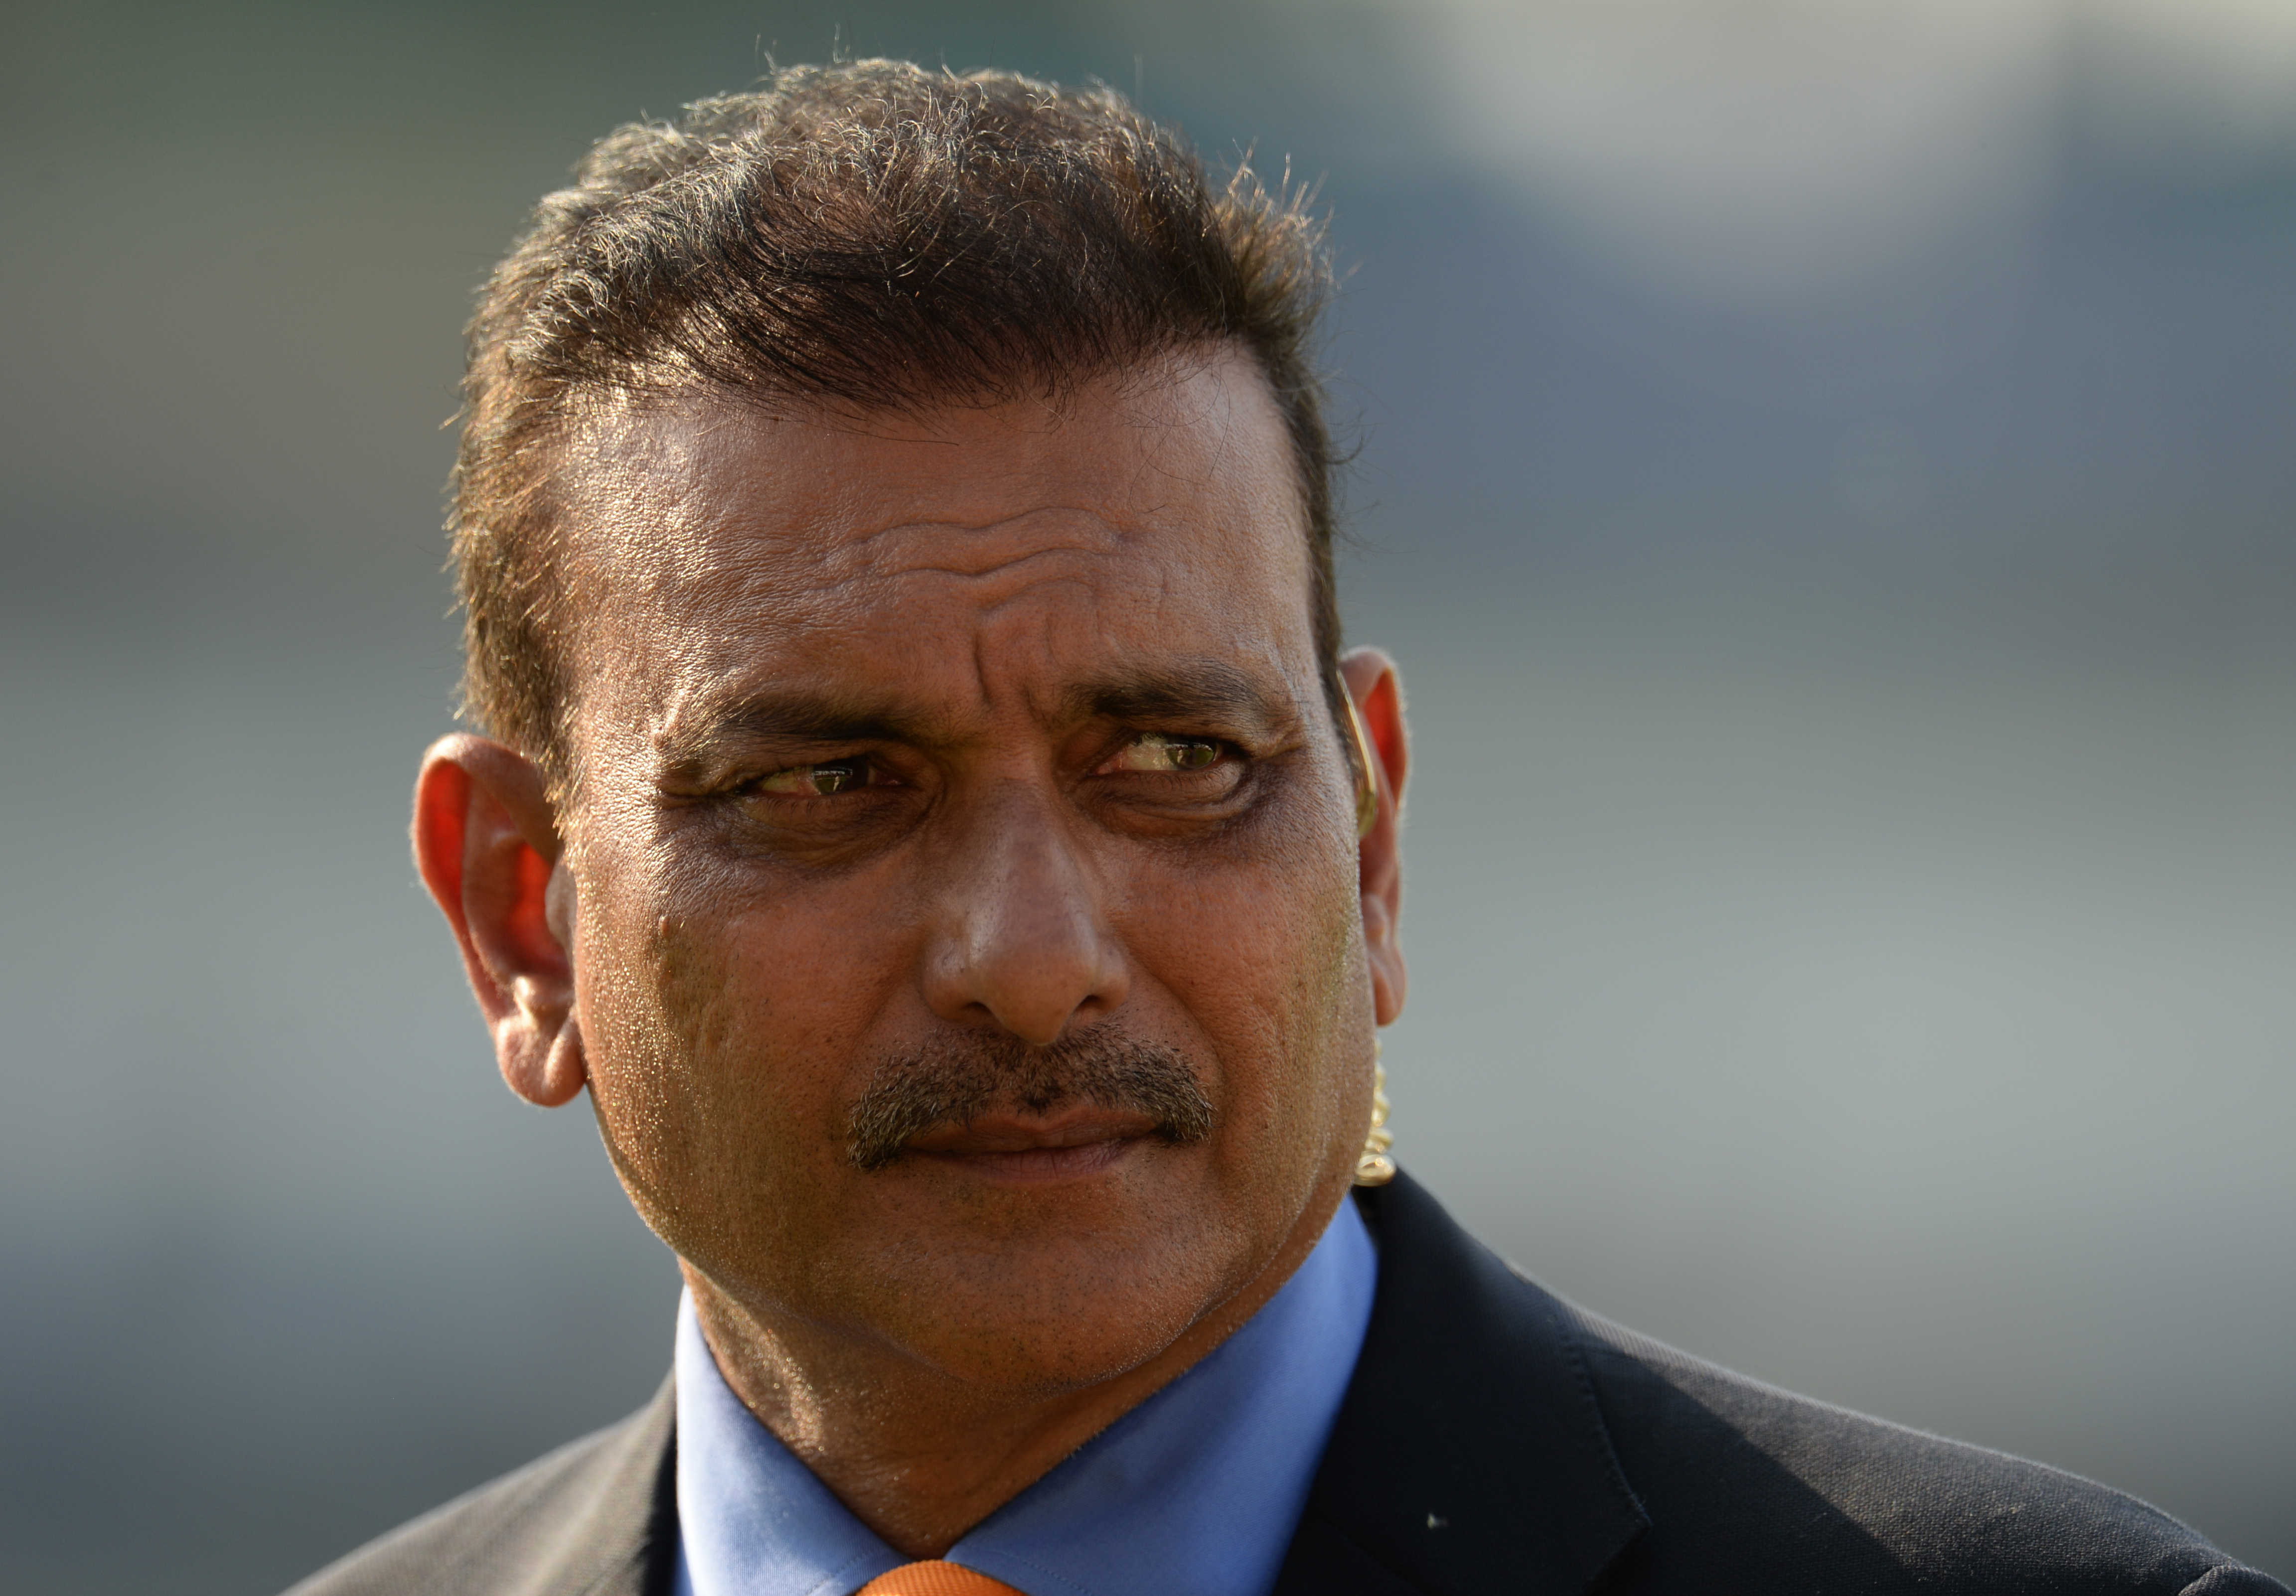 AUS vs PAK | Twitter in splits as Ravi Shastri embarrassingly fumbles for words during trademark toss call